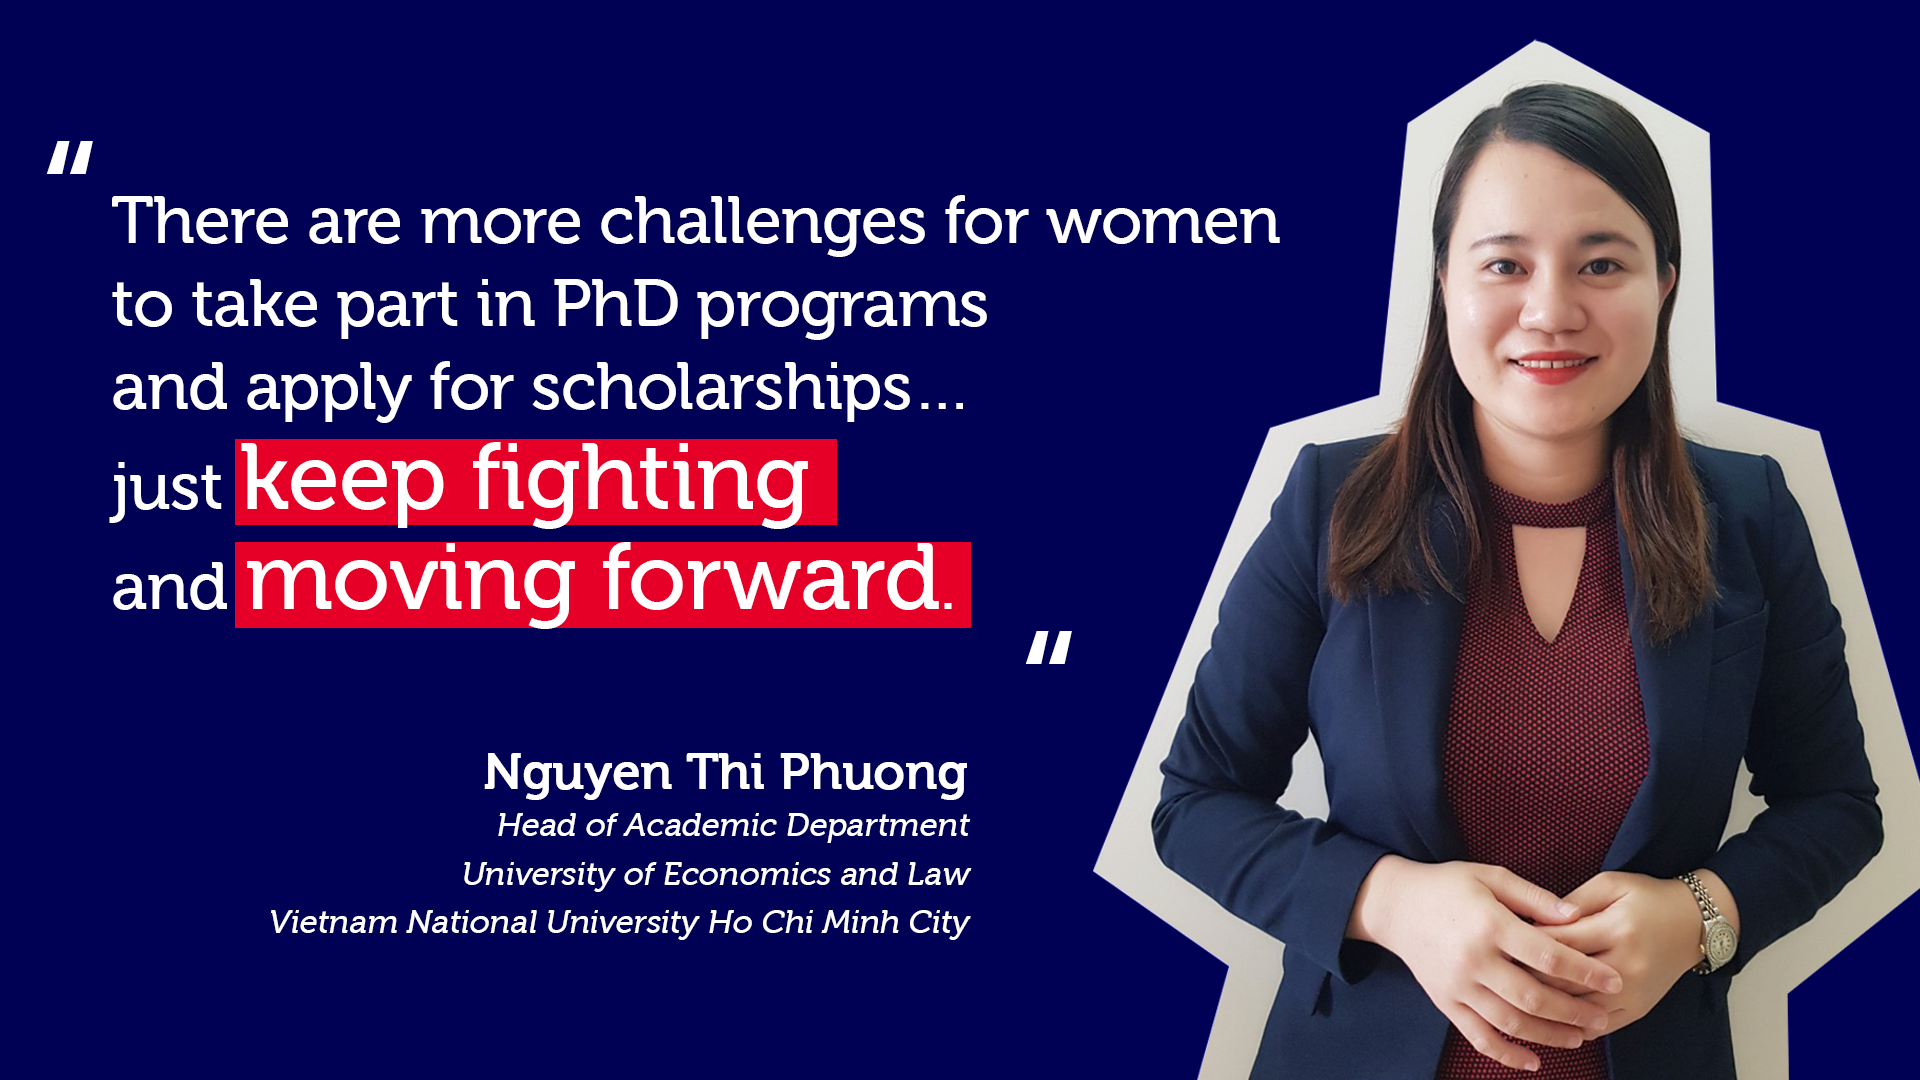 Head of Academic Department, British Education Project, in University of Economics and Law – Vietnam National University Ho Chi Minh City “There are more challenges for women to take part in PhD programs and apply for scholarships…just keep fighting and moving forward.”